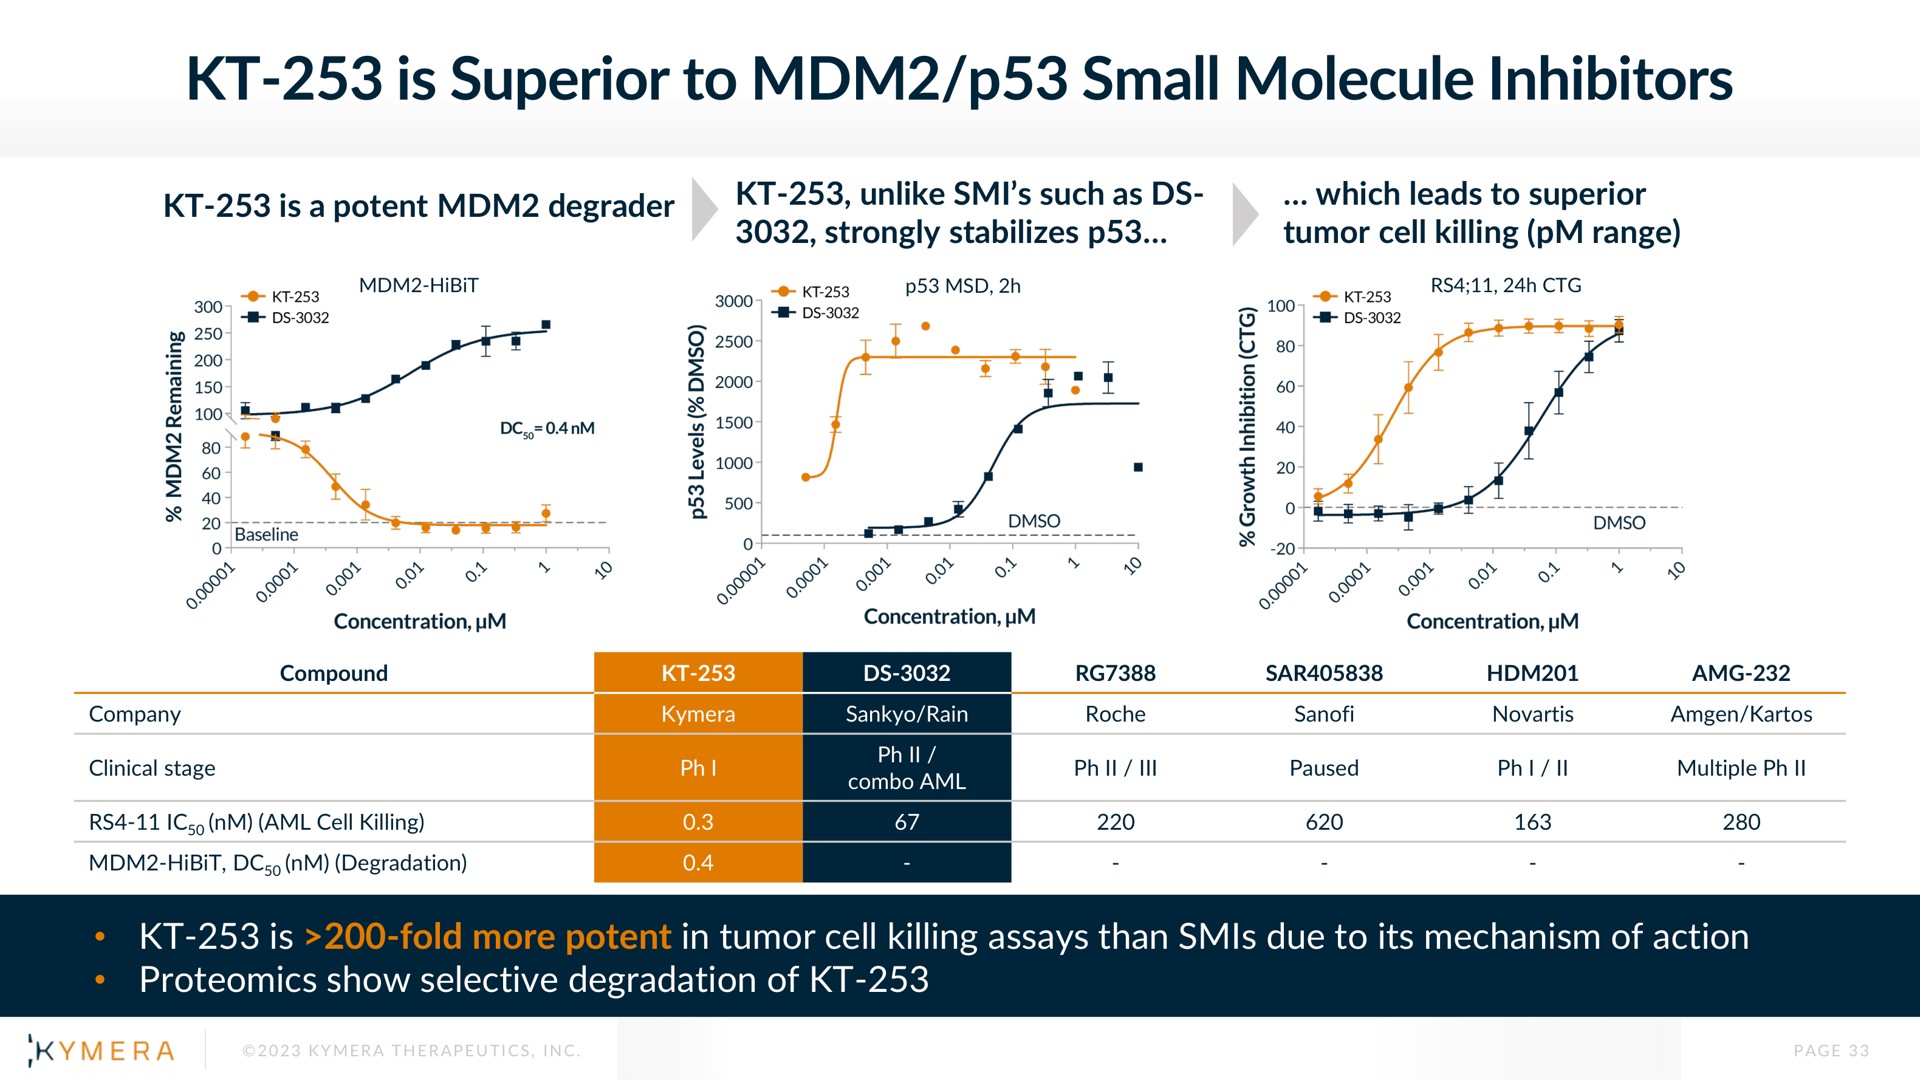 is superior to small molecule inhibitors | Kymera